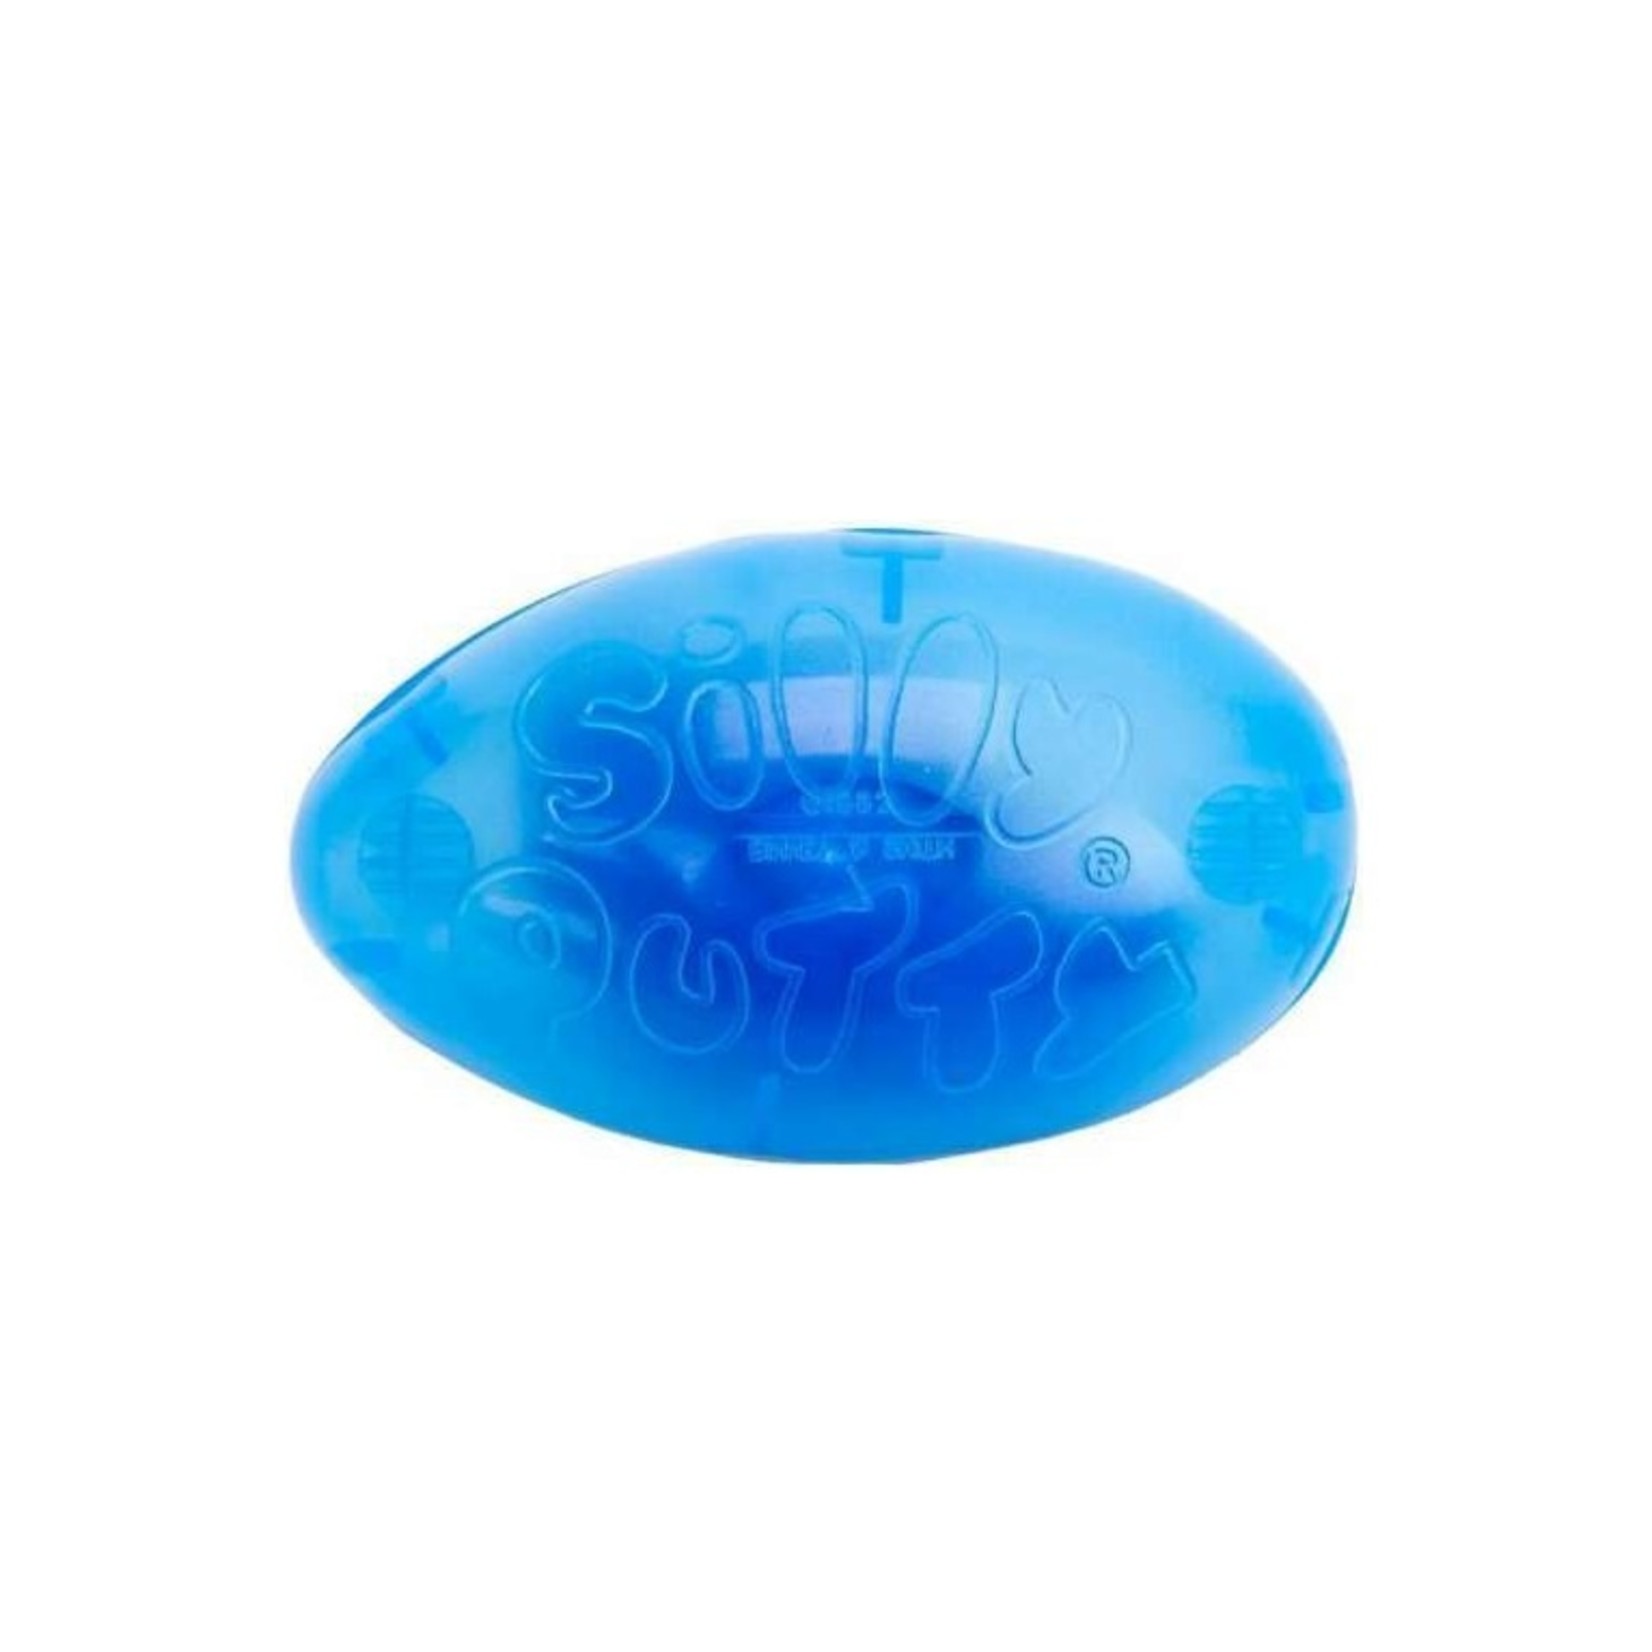 Crayola Silly putty - Super bounce